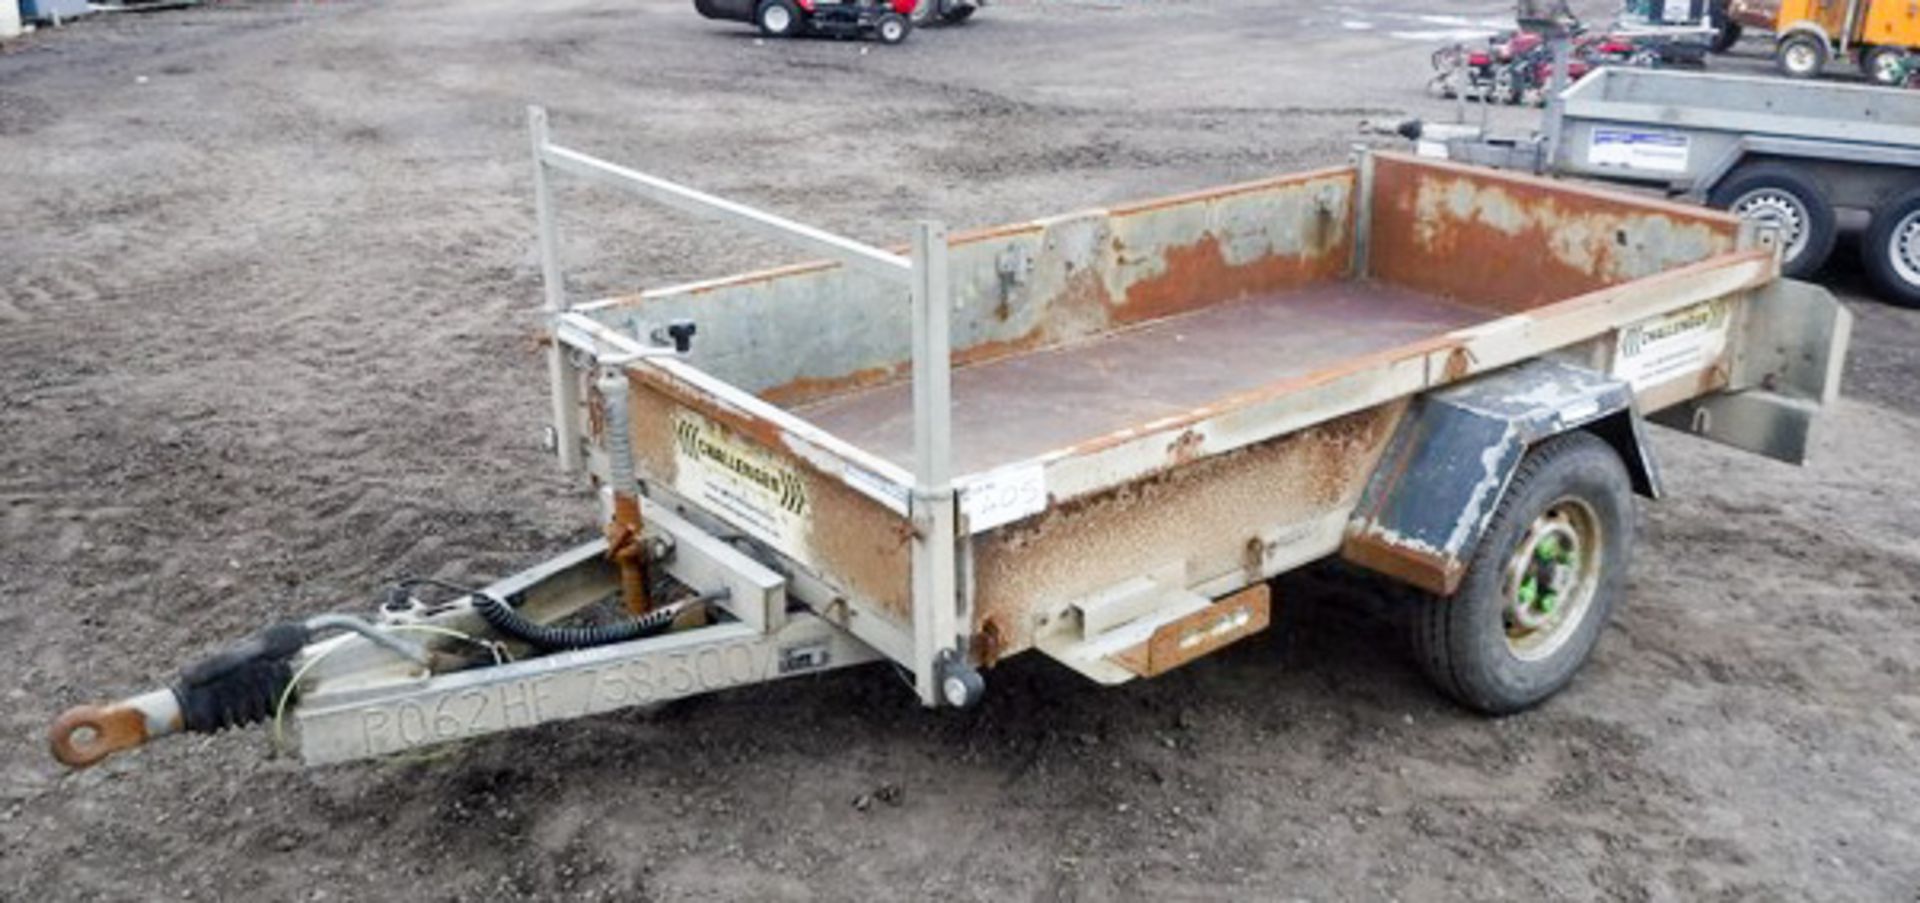 INDESPENSION CHALLENGER SINGLE AXLE TRAILER 8X4 SN - G064807 ASSET NO - 758-3007